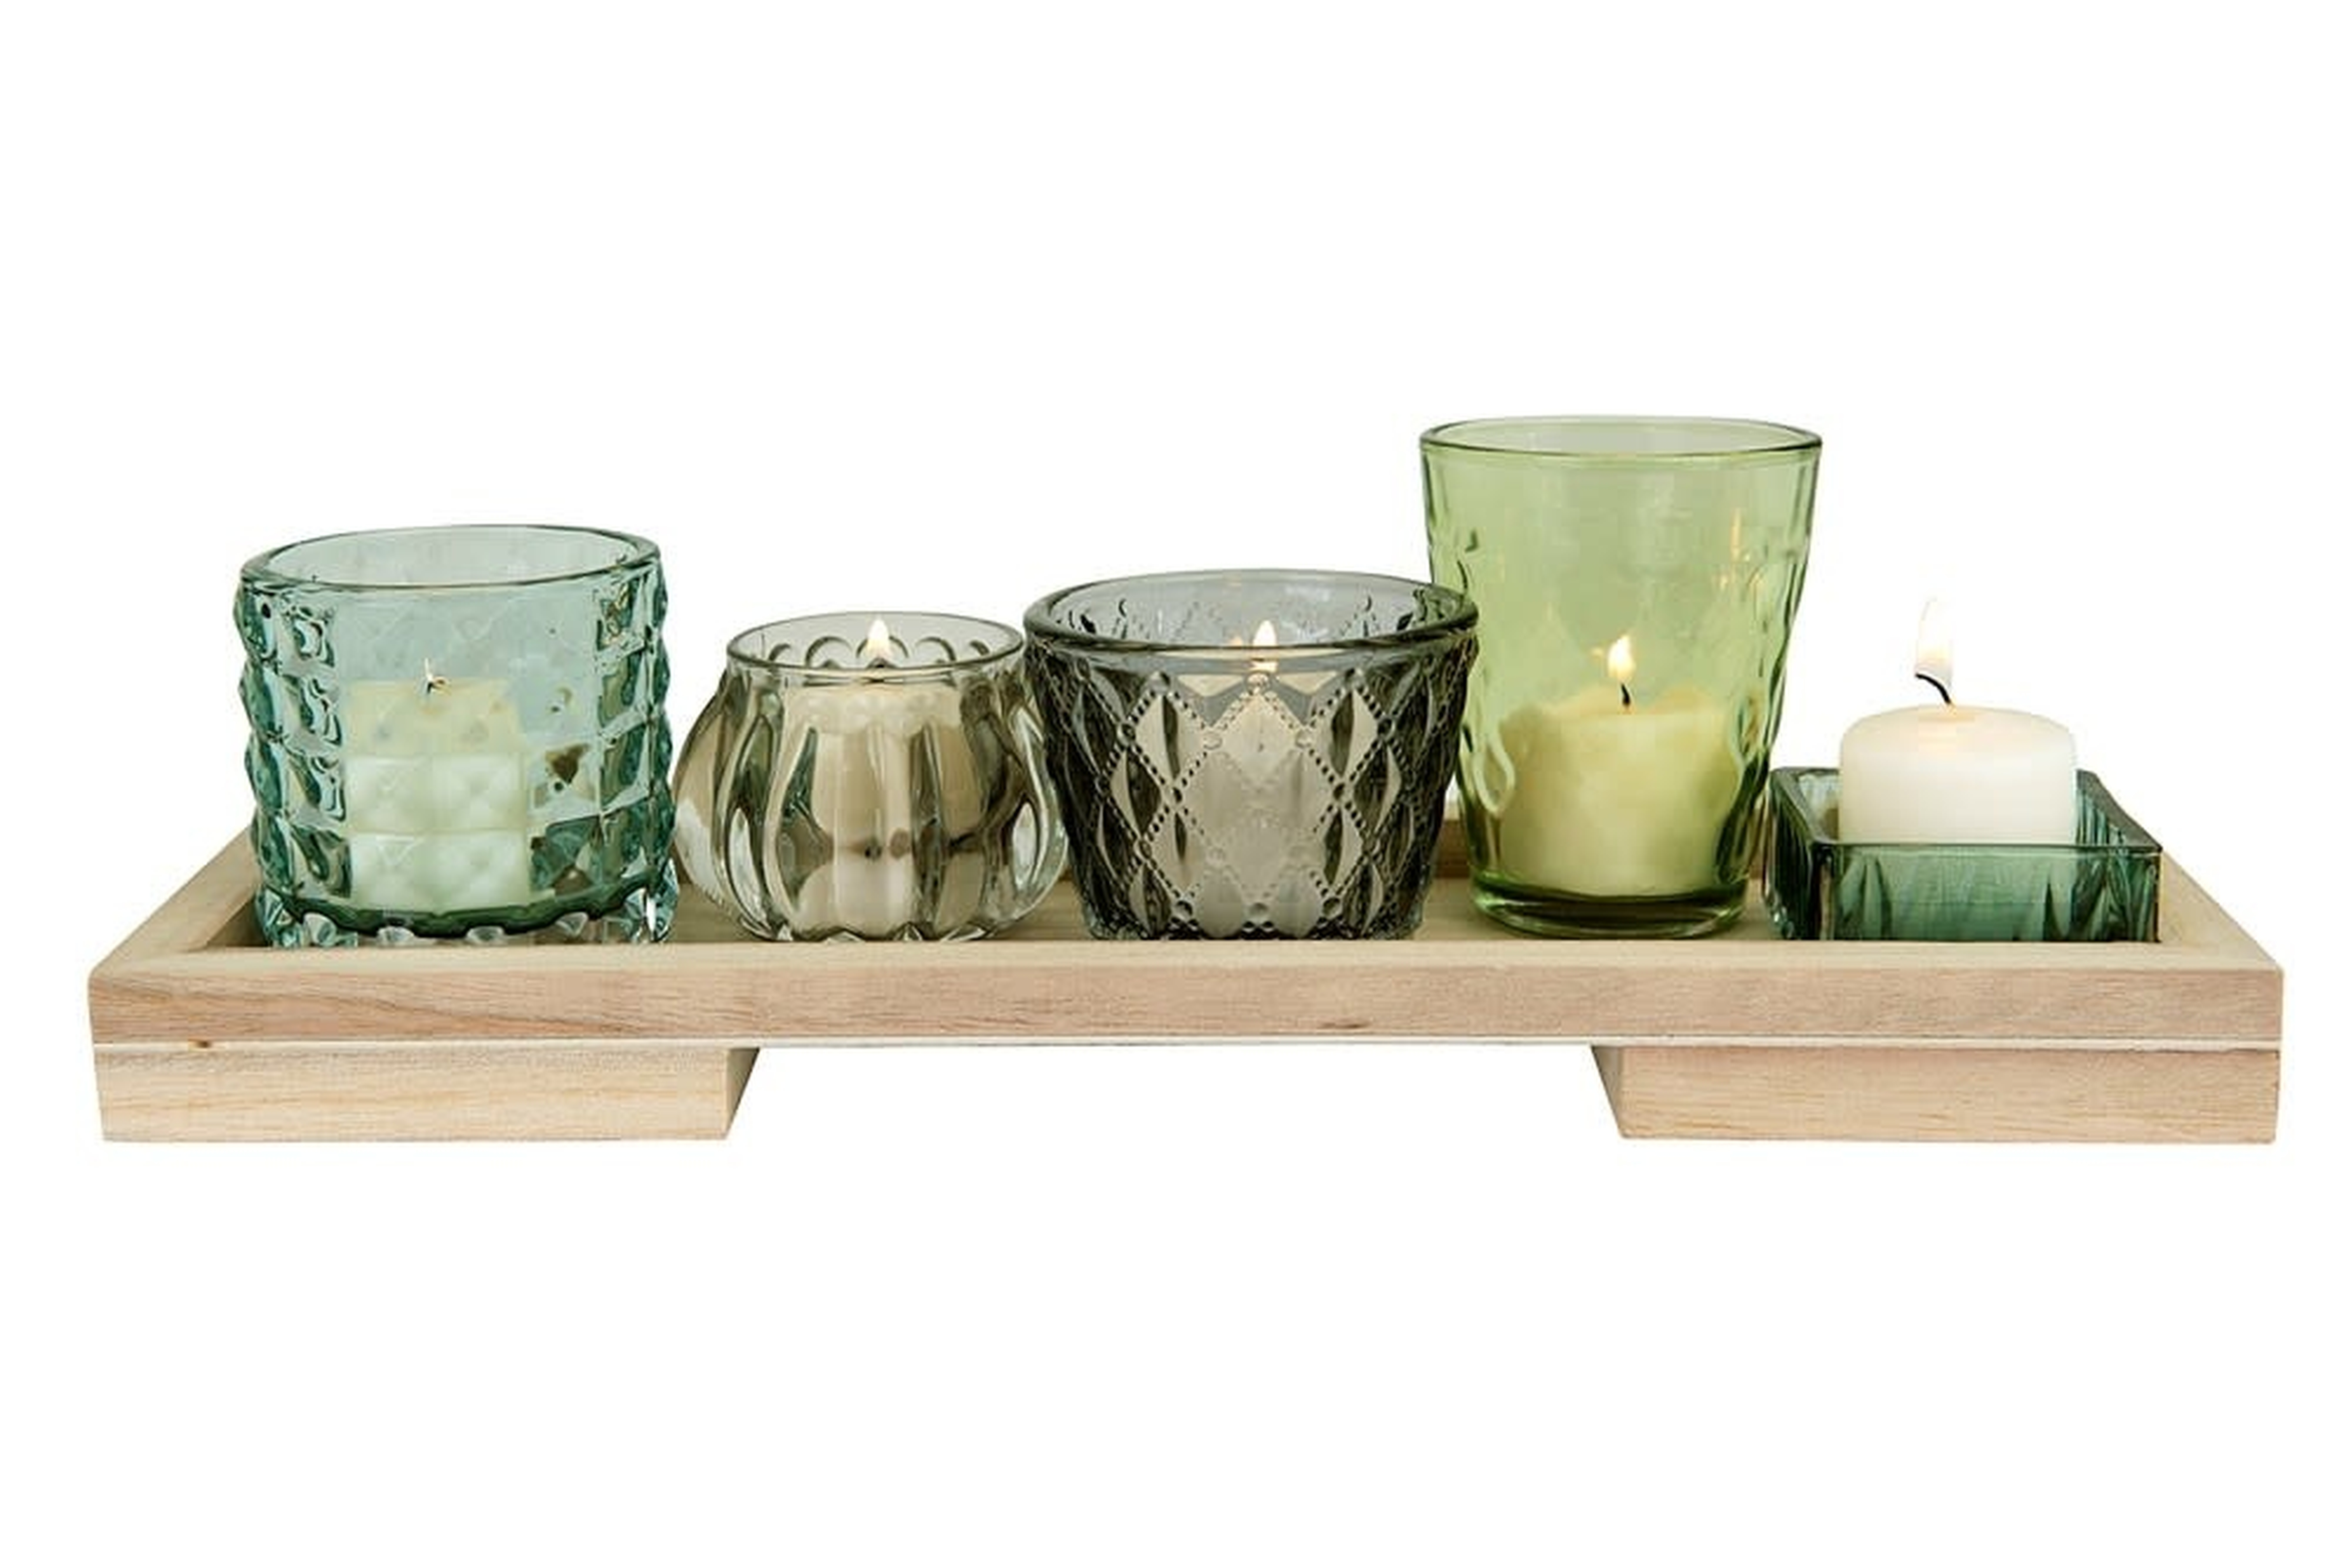 Glass Votive/Tealight Holders on Wood Tray, Set of 5 - Nomad Home